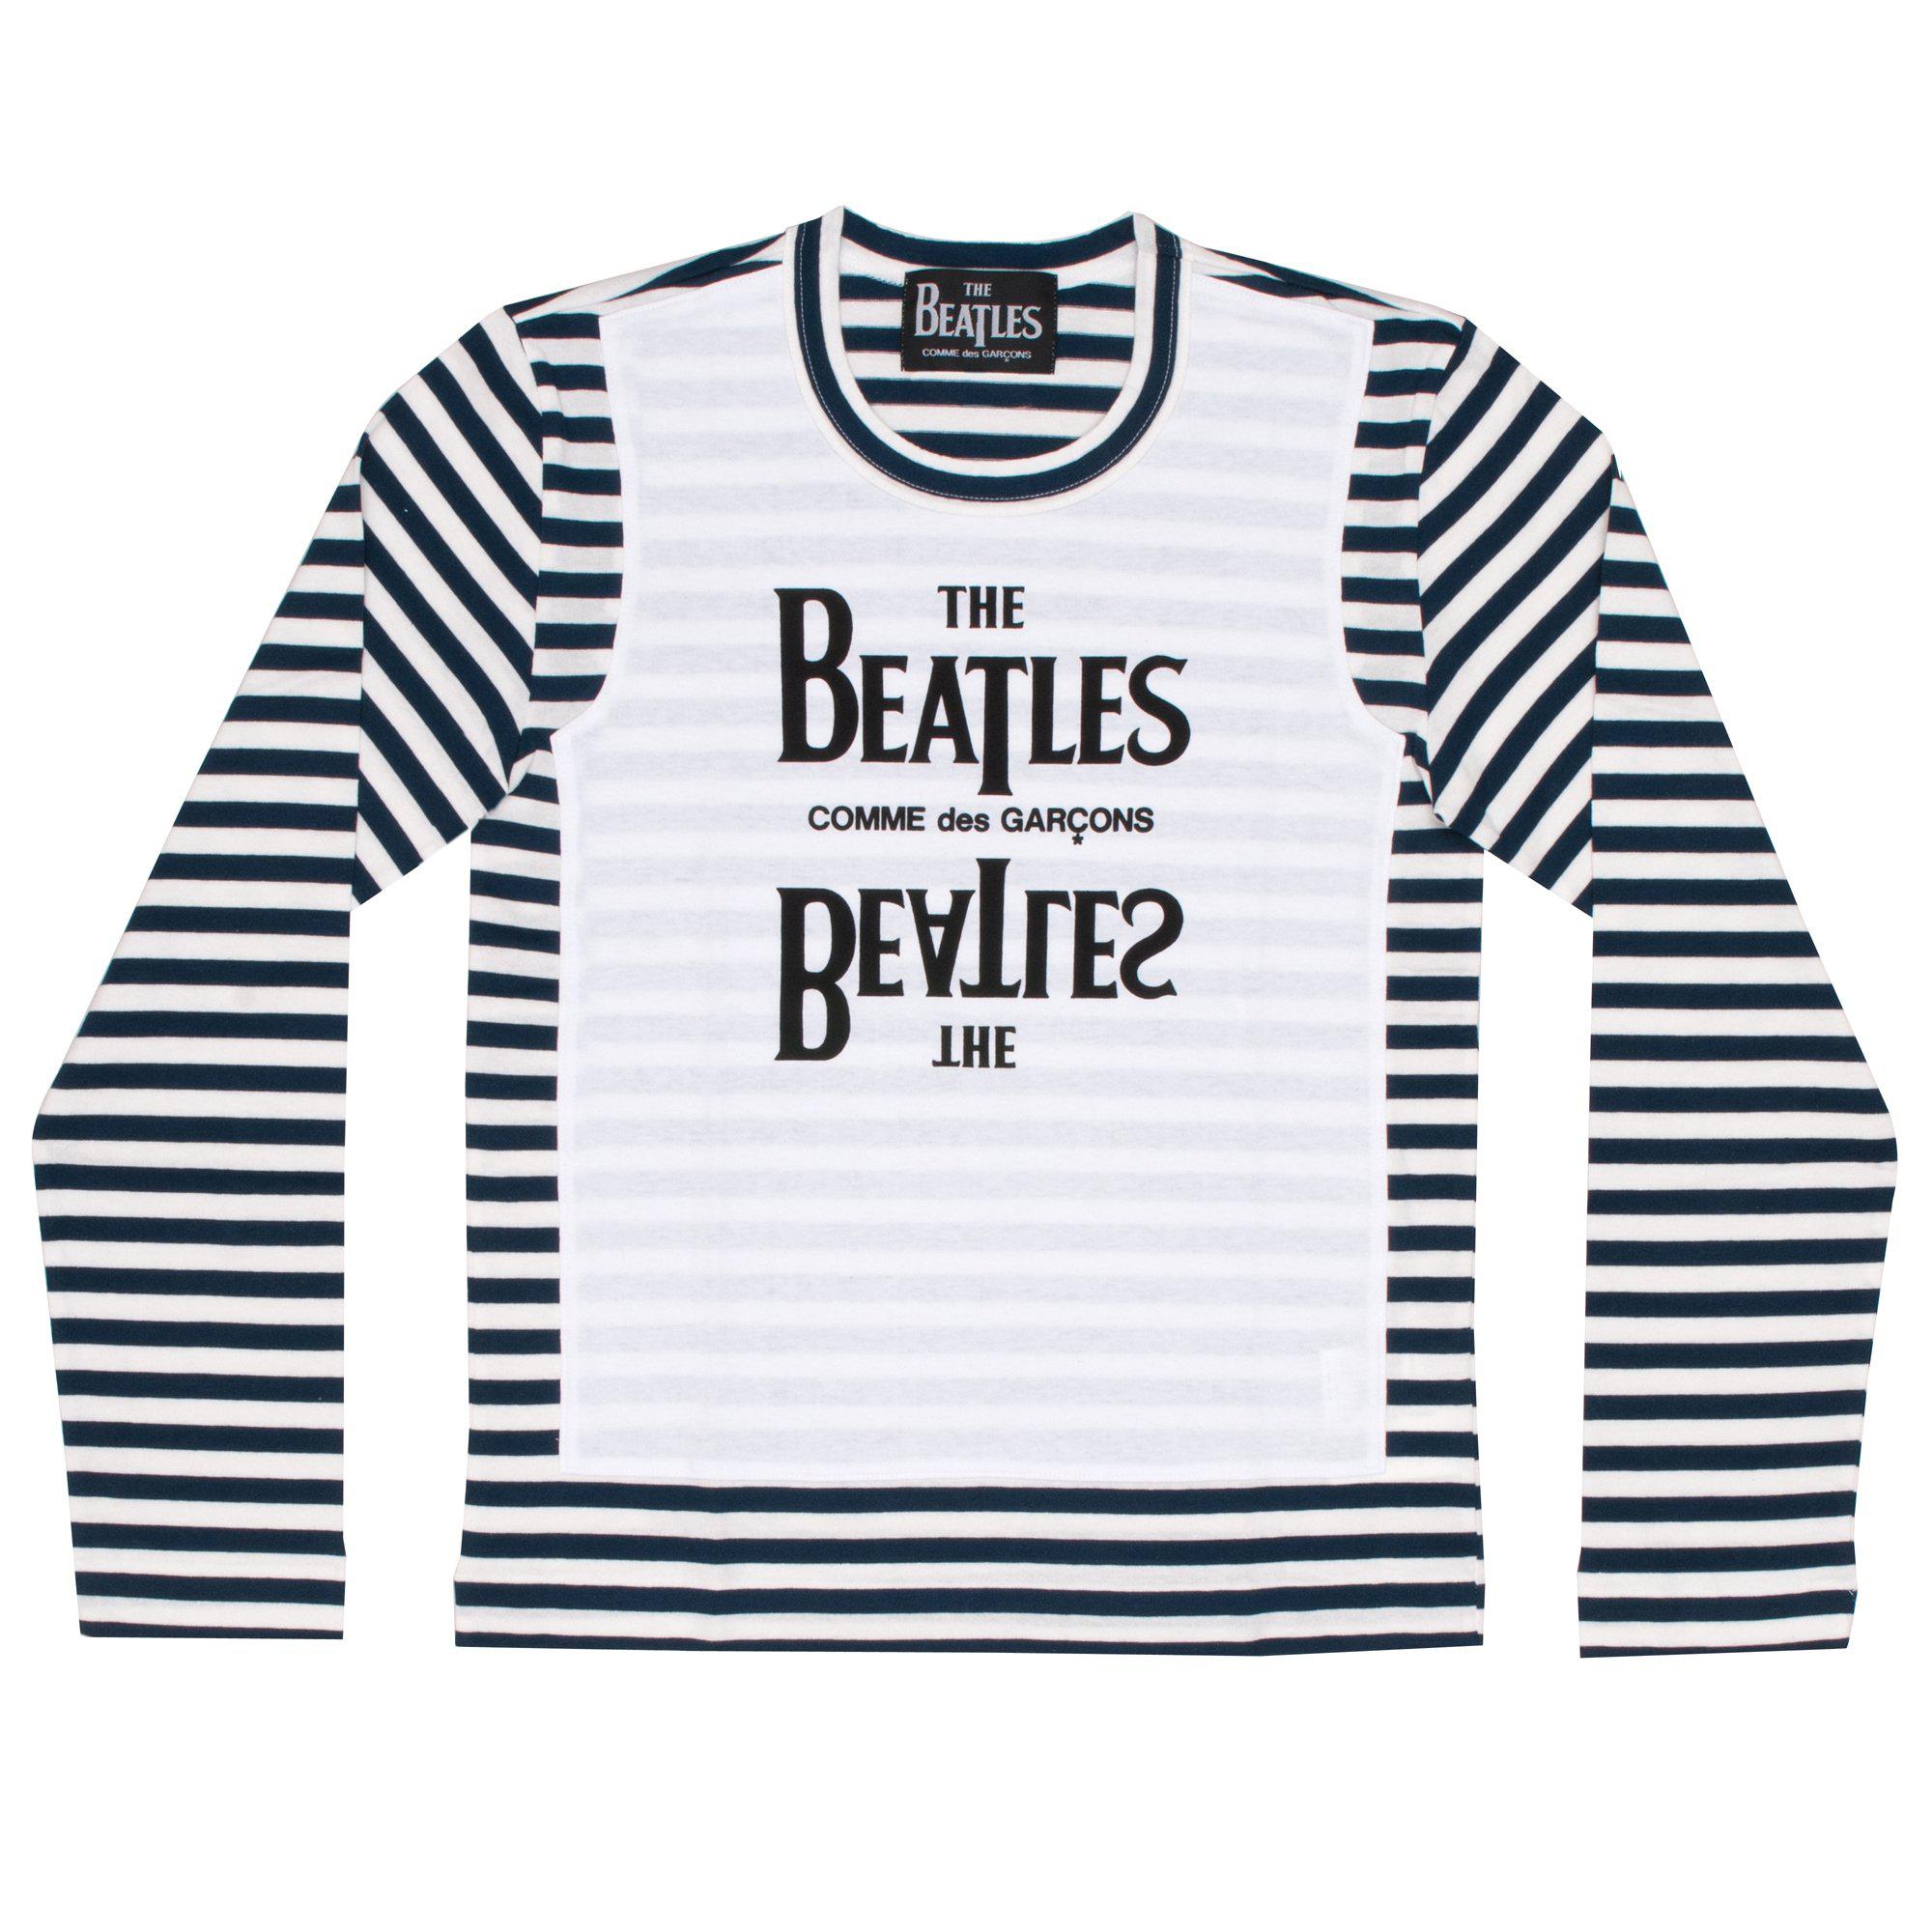 CDG x The Beatles Long Sleeve Tee Shirt (Navy/White) by COMME DES GARCONS X BEATLES